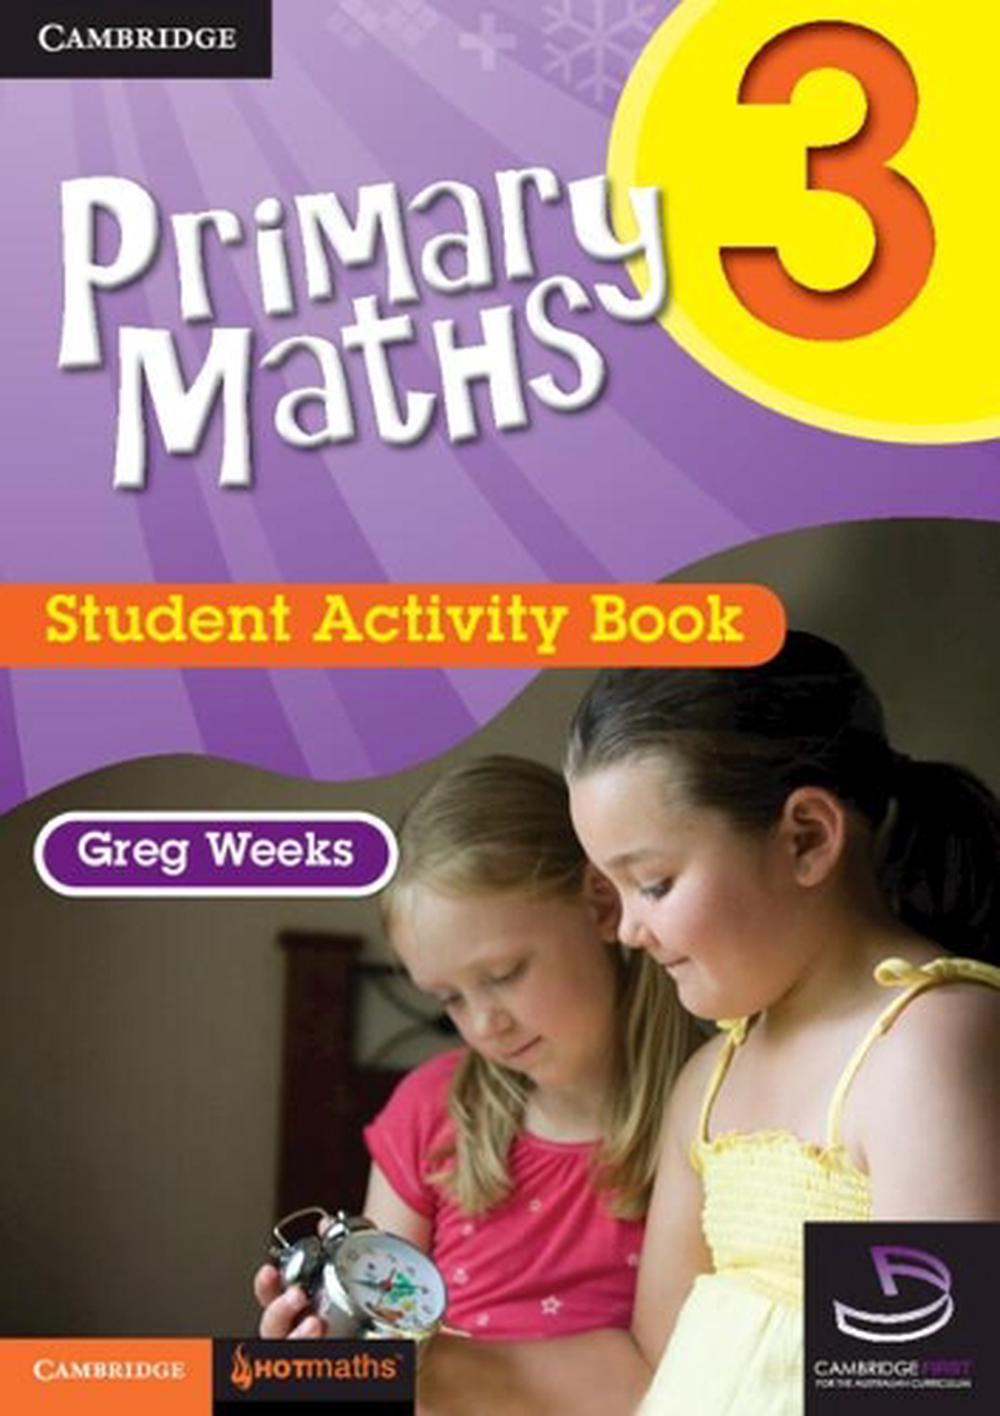 active-maths-student-activity-bk-3-by-greg-weeks-english-paperback-book-free-s-9780521745352